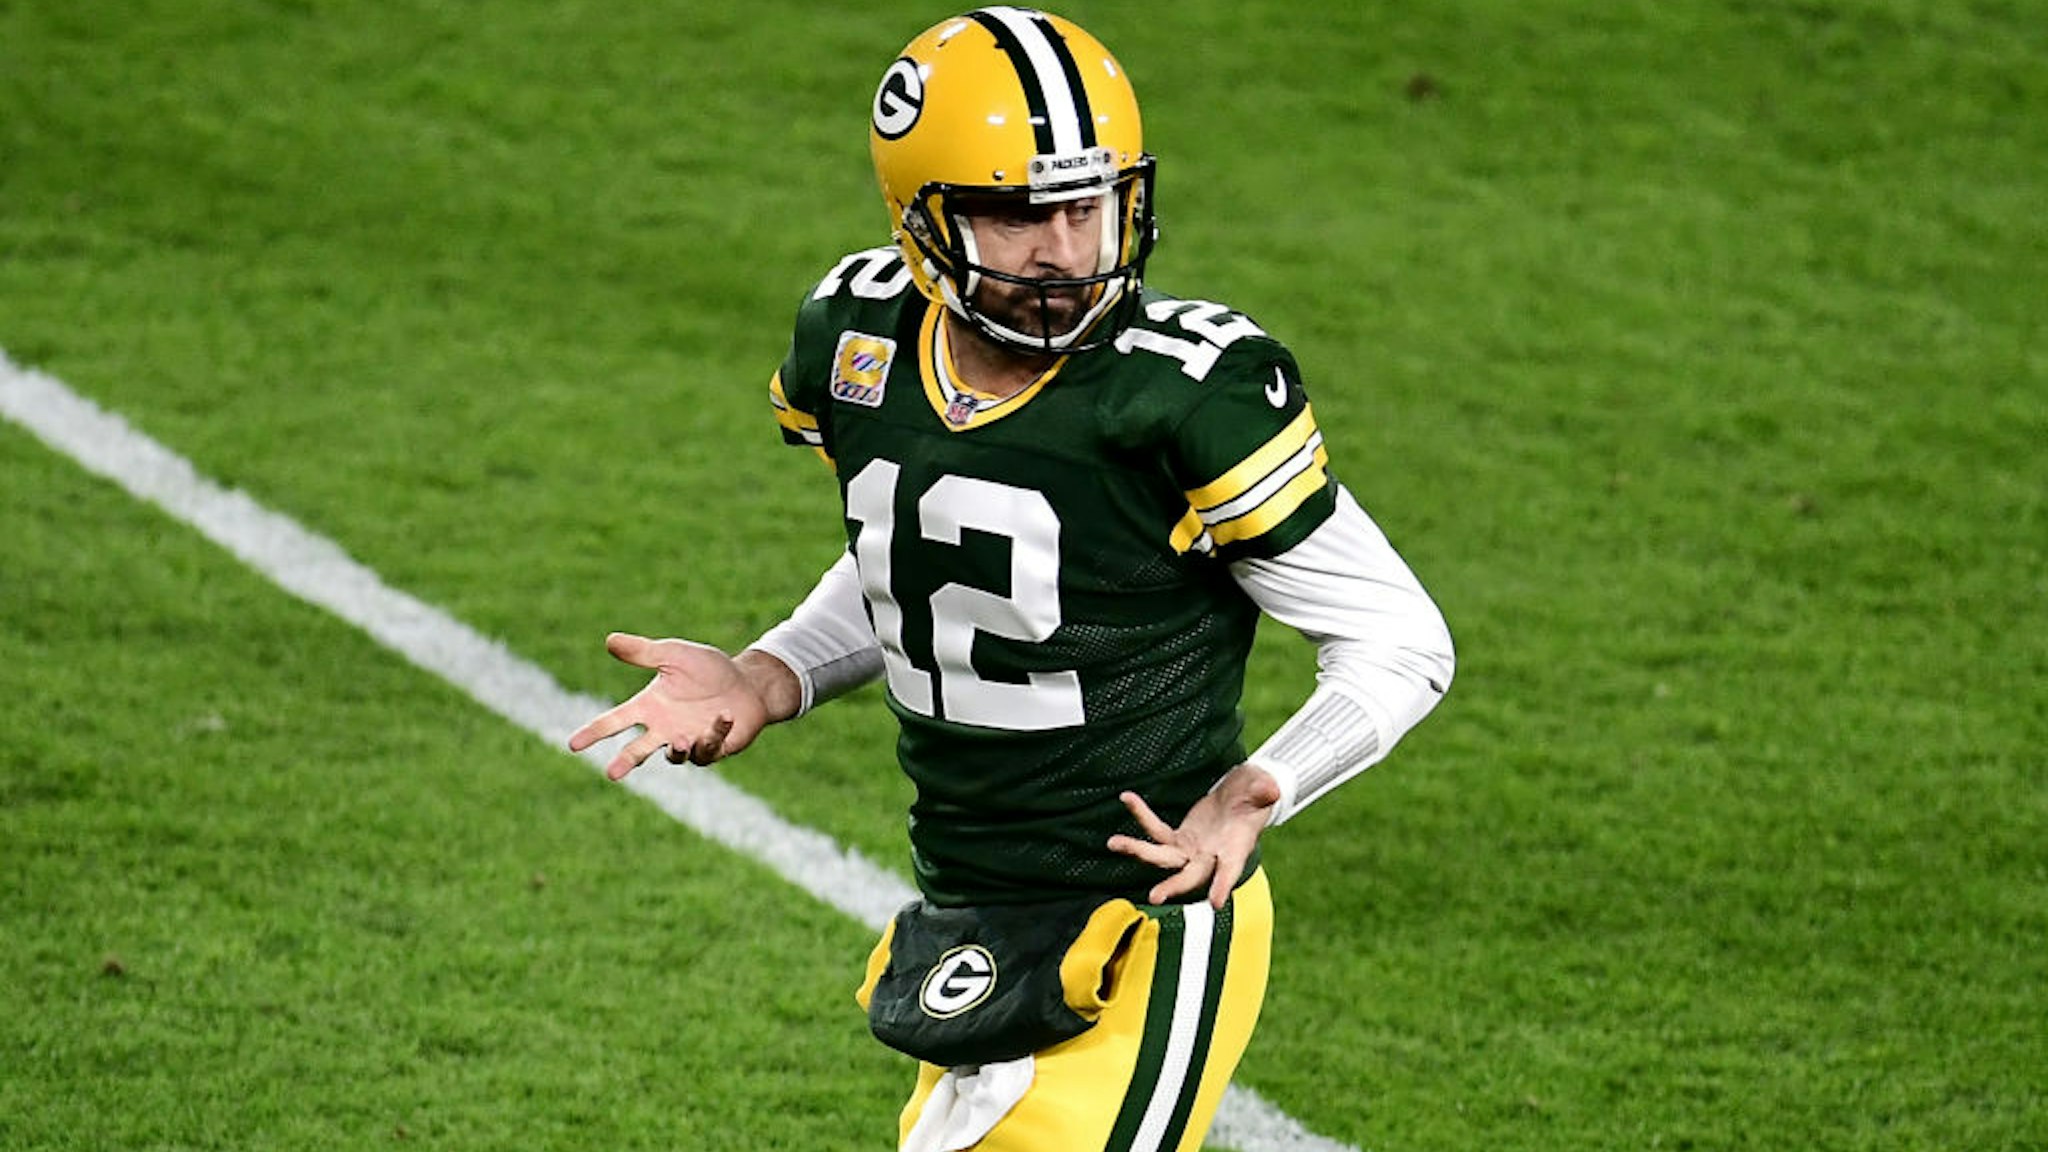 GREEN BAY, WISCONSIN - OCTOBER 05: Aaron Rodgers #12 of the Green Bay Packers reacts after throwing a touchdown pass to Robert Tonyan #85 (not pictured) during the second quarter against the Atlanta Falcons at Lambeau Field on October 05, 2020 in Green Bay, Wisconsin. (Photo by Stacy Revere/Getty Images)